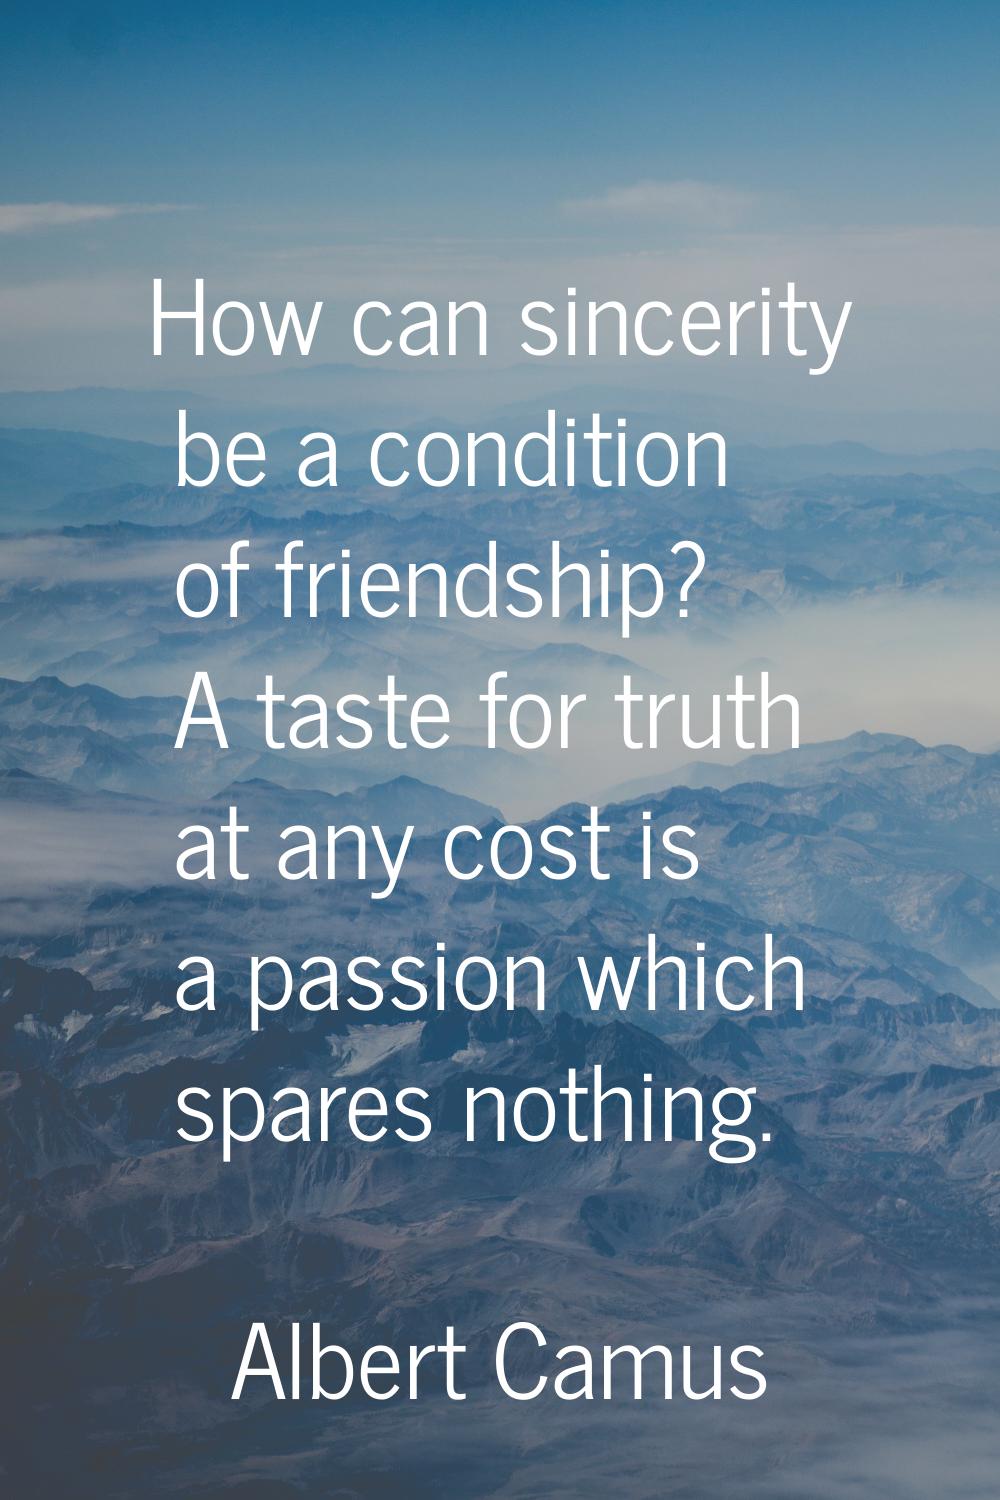 How can sincerity be a condition of friendship? A taste for truth at any cost is a passion which sp